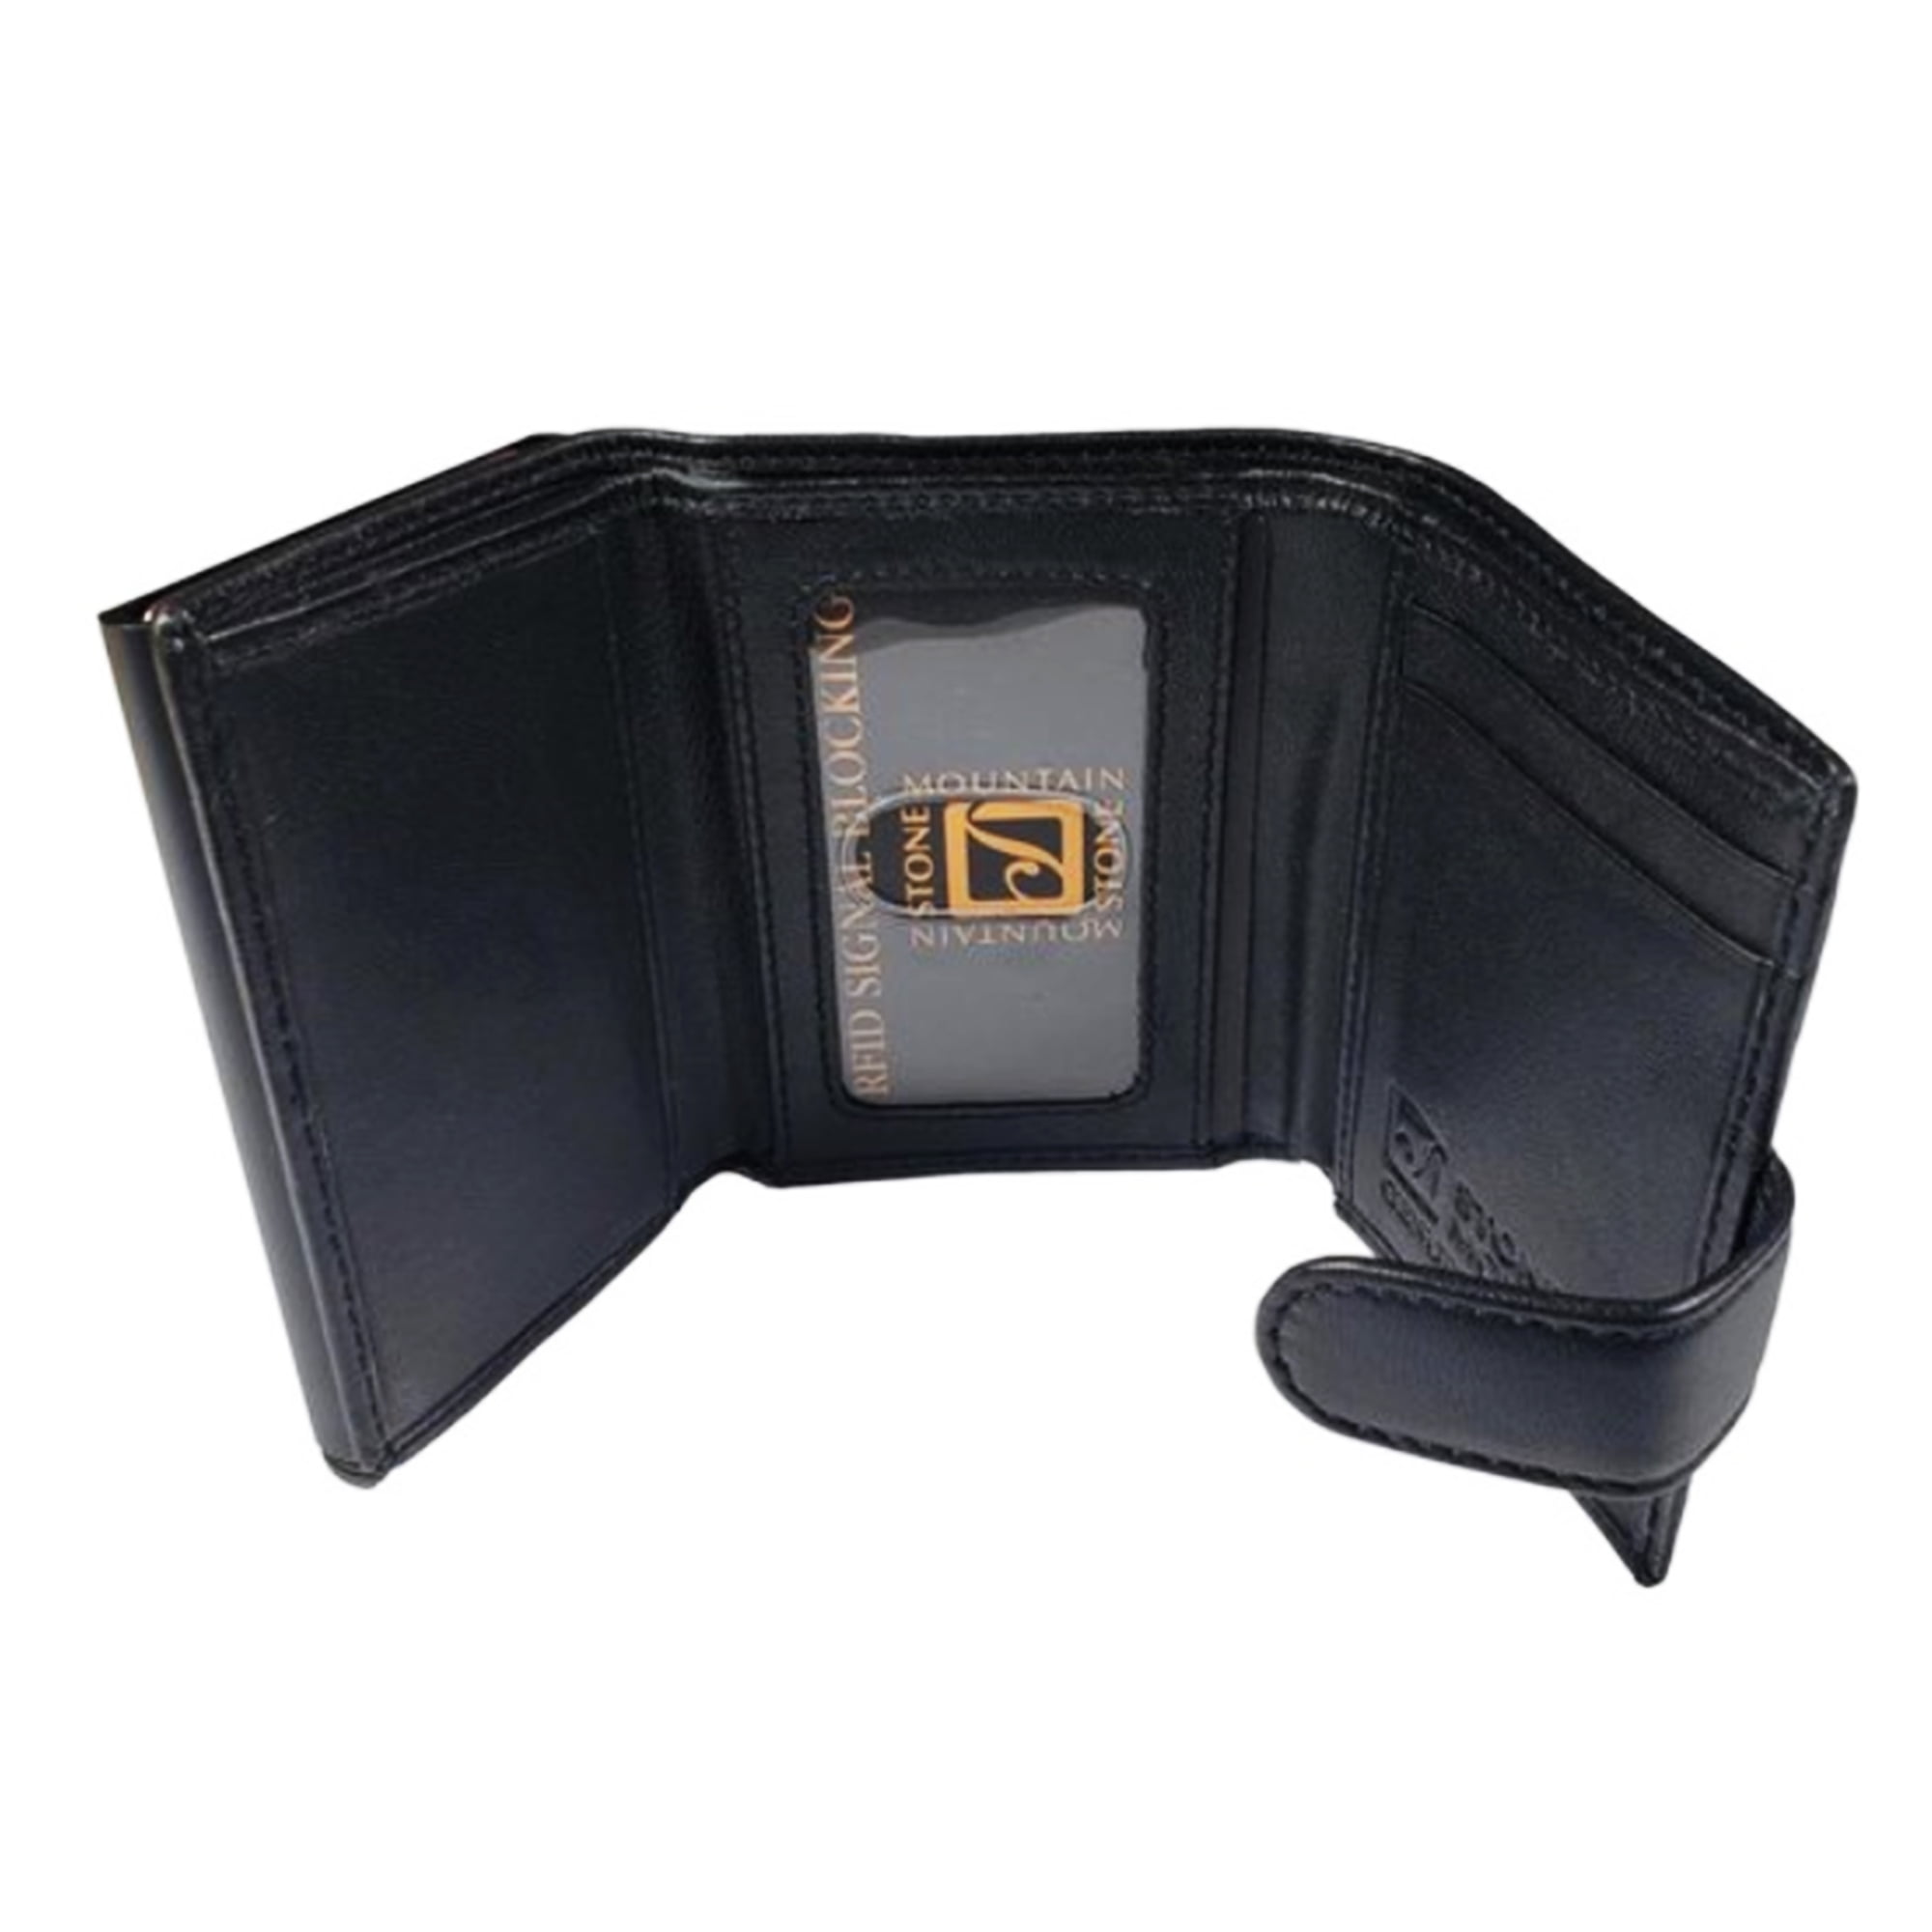 STONE MOUNTAIN Men's Leather Wallet, TRAVELLER, RFID Protection - BLACK  (SM-1-174-1P)